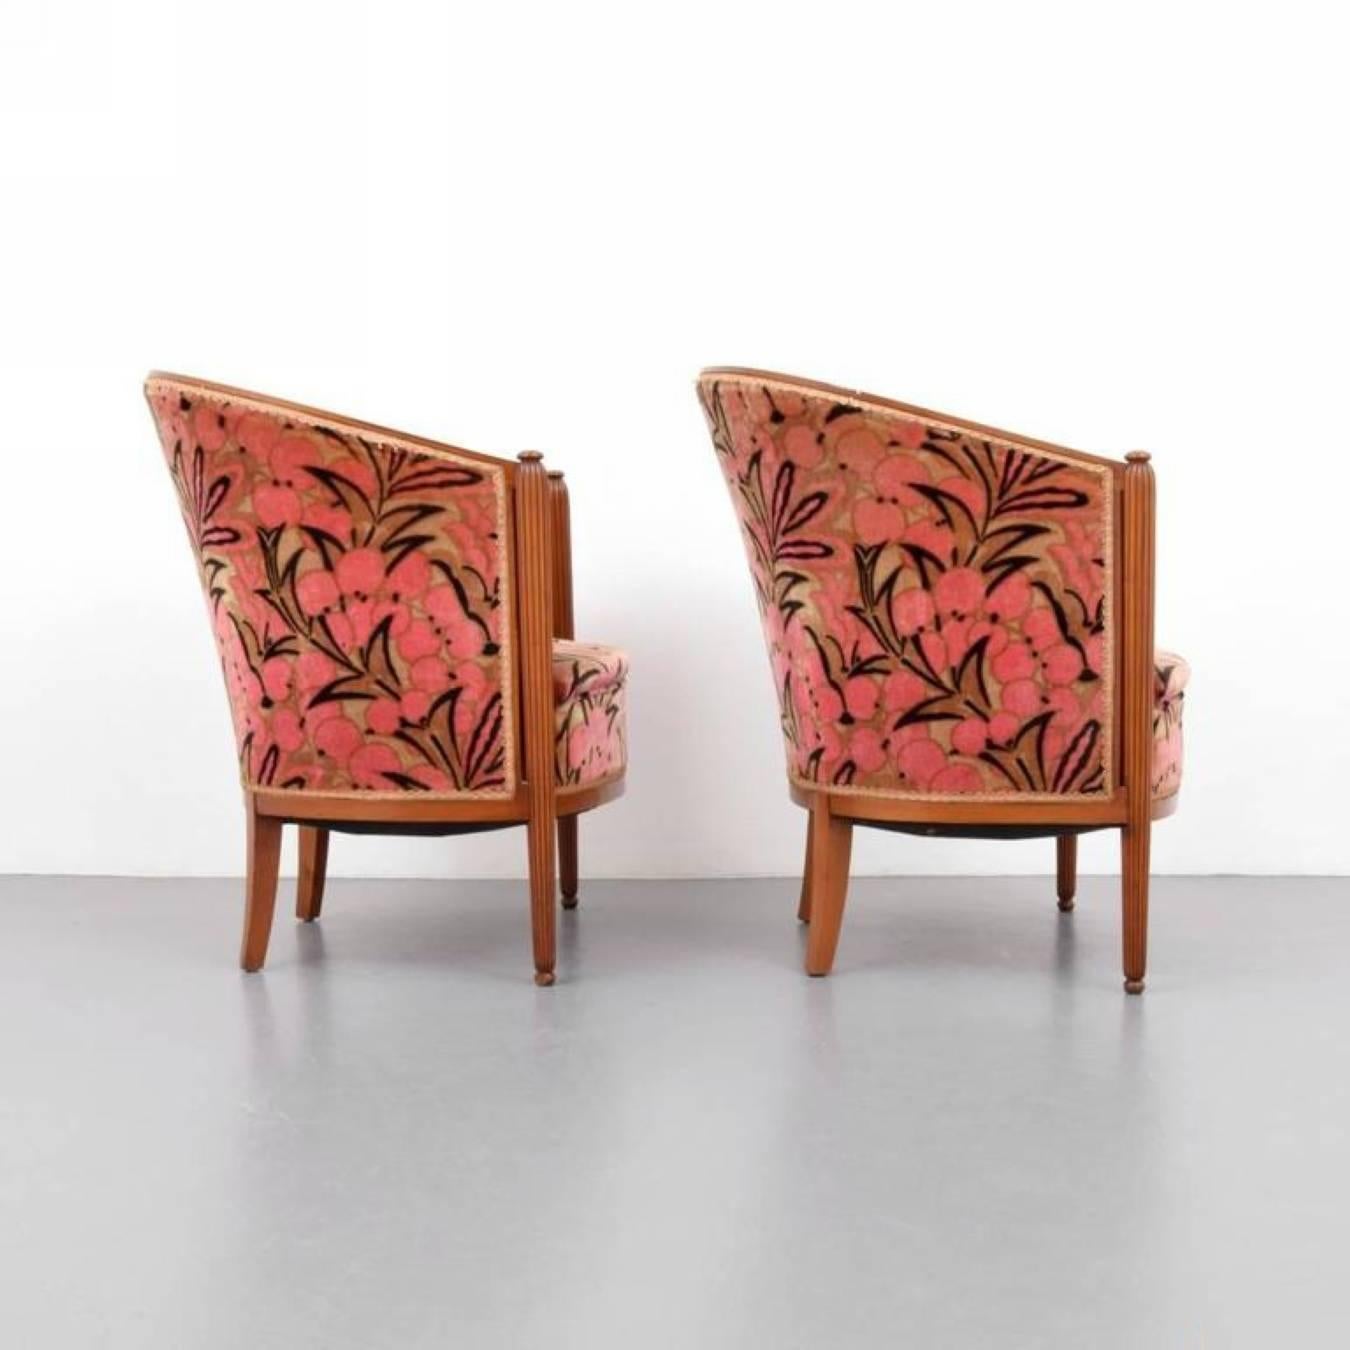 Mid-20th Century Pair of Art Deco Club Chairs, Barbra Streisand Collection